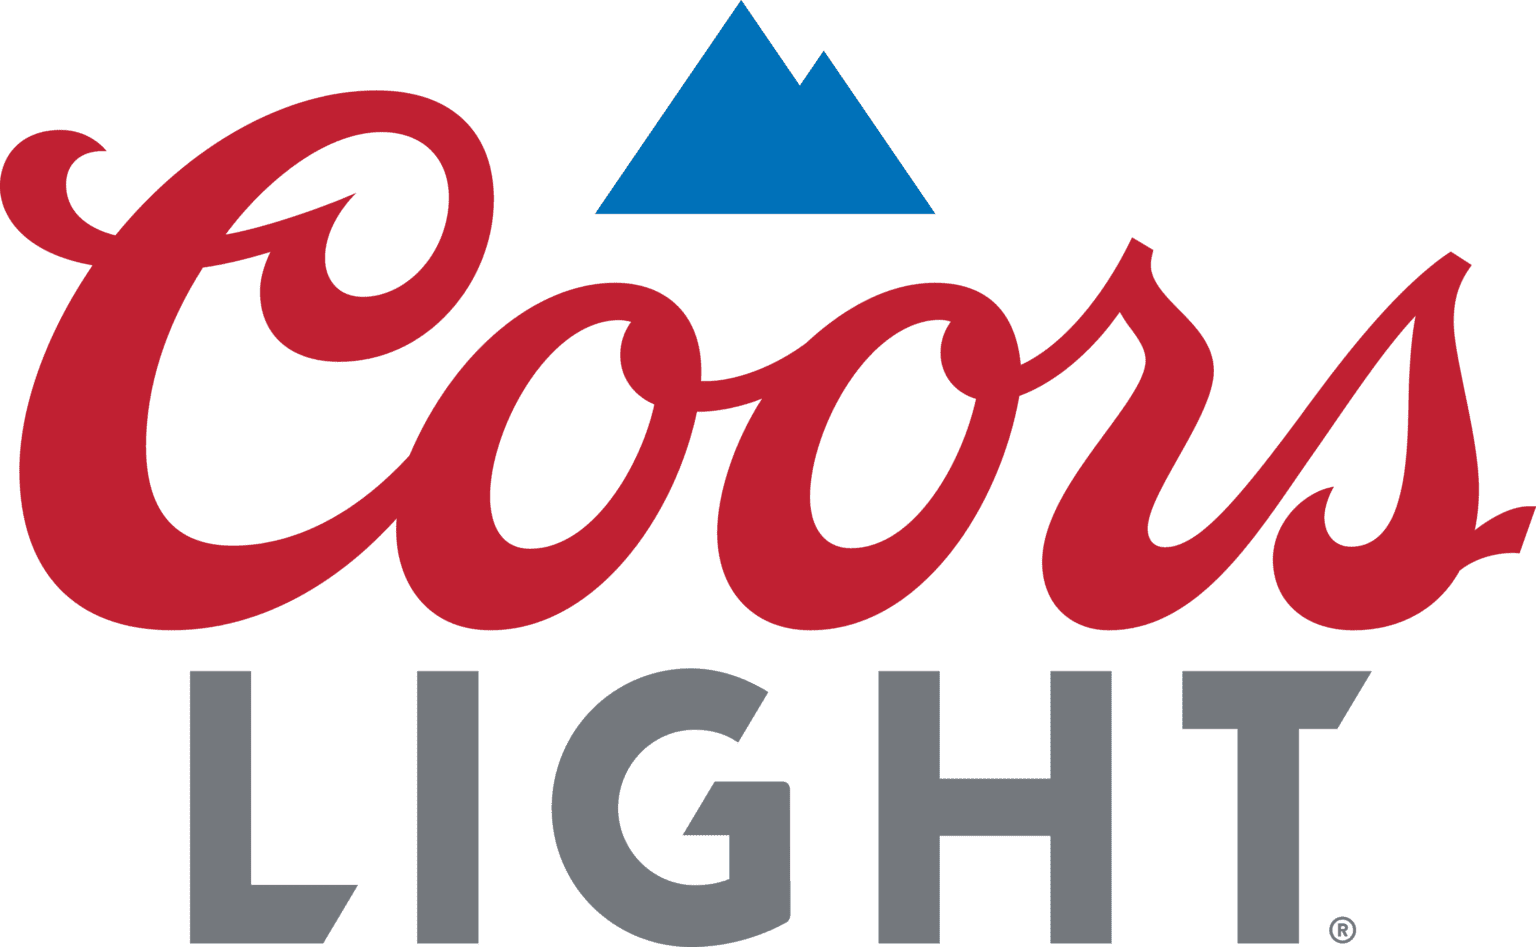 A close up of the word coors light